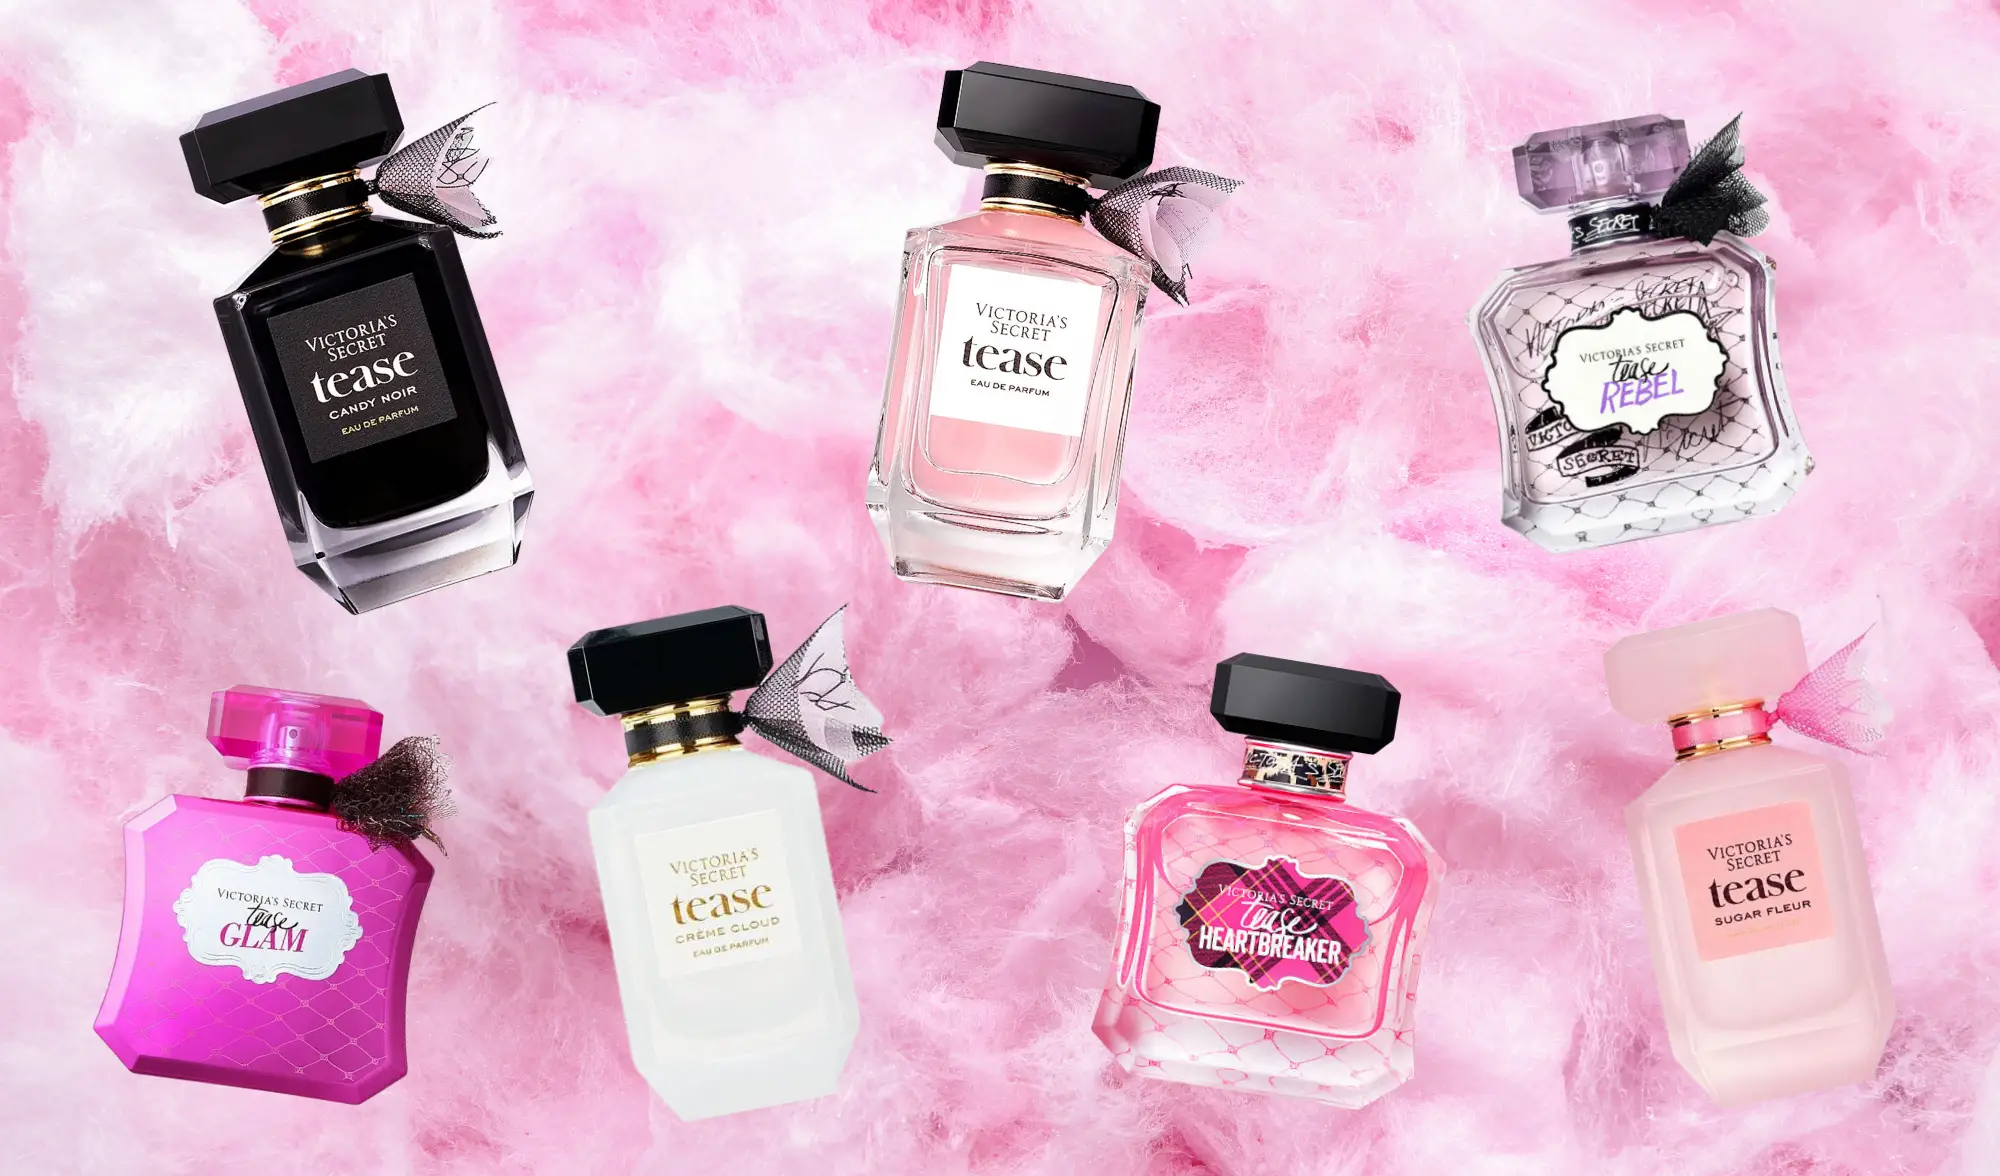 The Ultimate Guide To The Victoria’s Secret Tease Perfumes